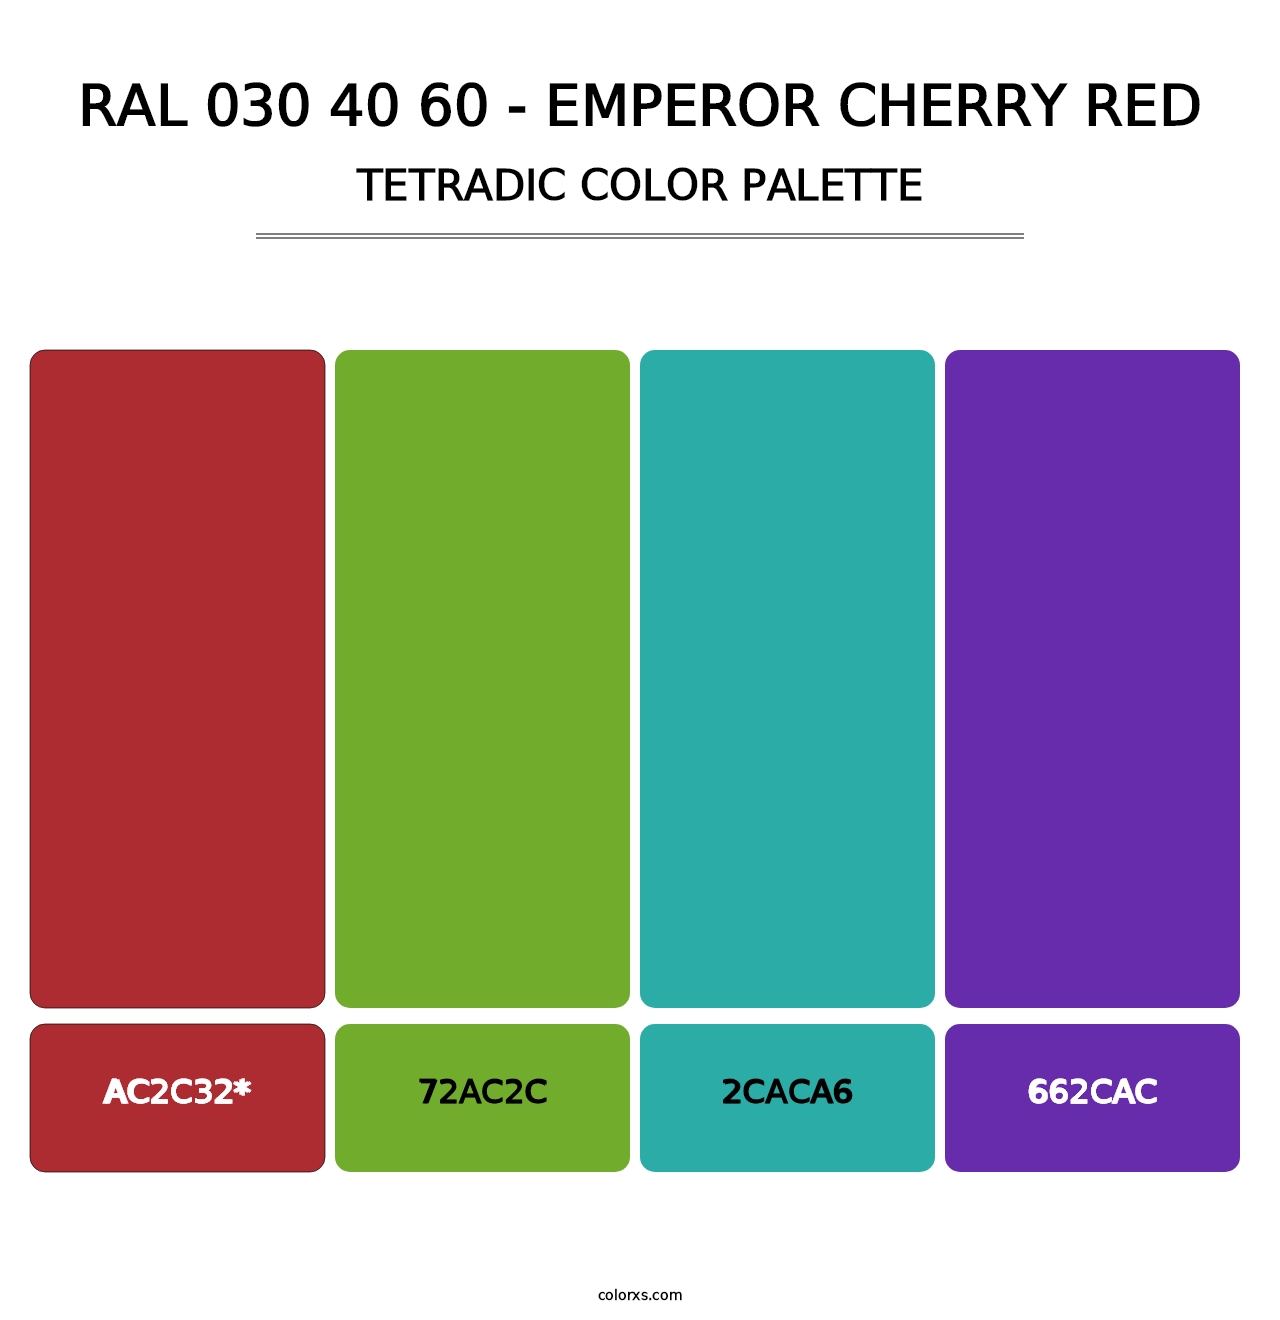 RAL 030 40 60 - Emperor Cherry Red - Tetradic Color Palette